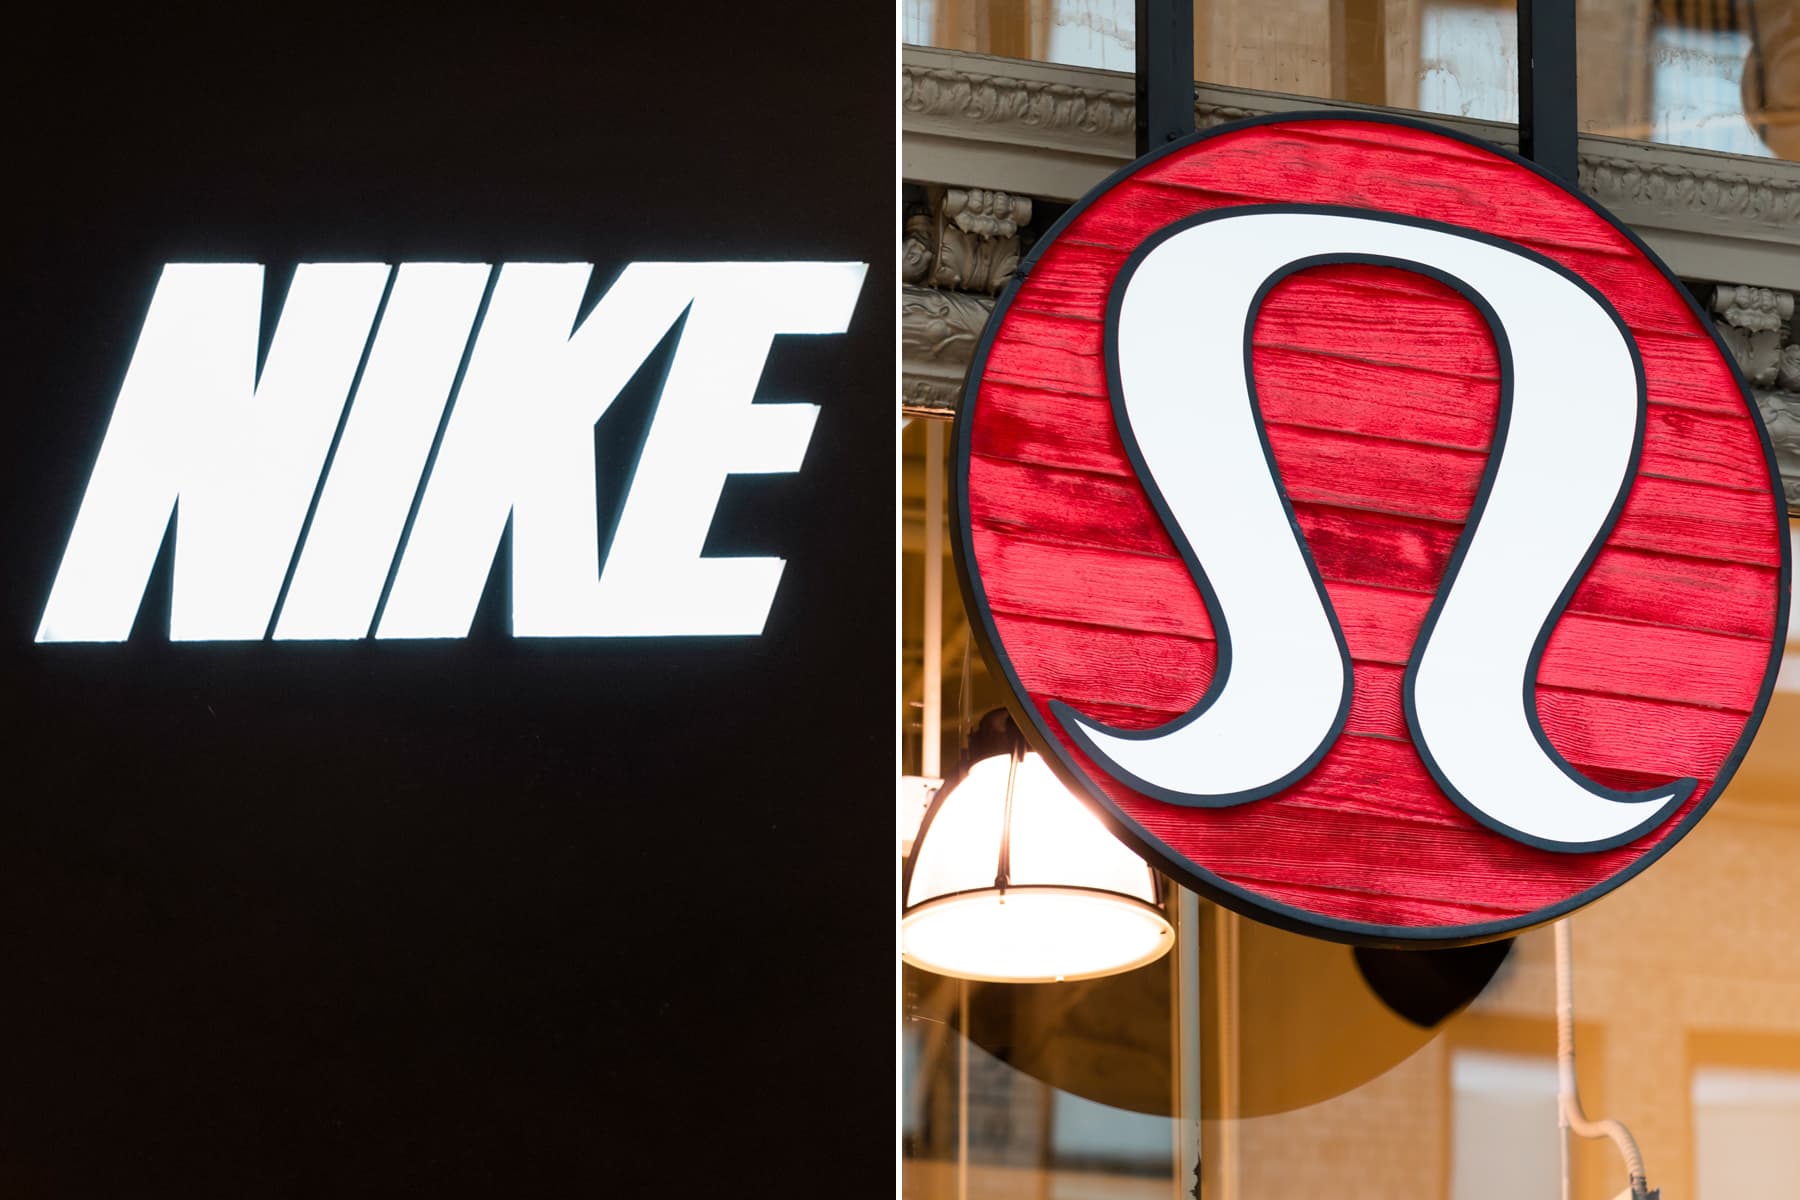 Nike sues Lululemon for patent infringement over at-home Mirror health club and health apps